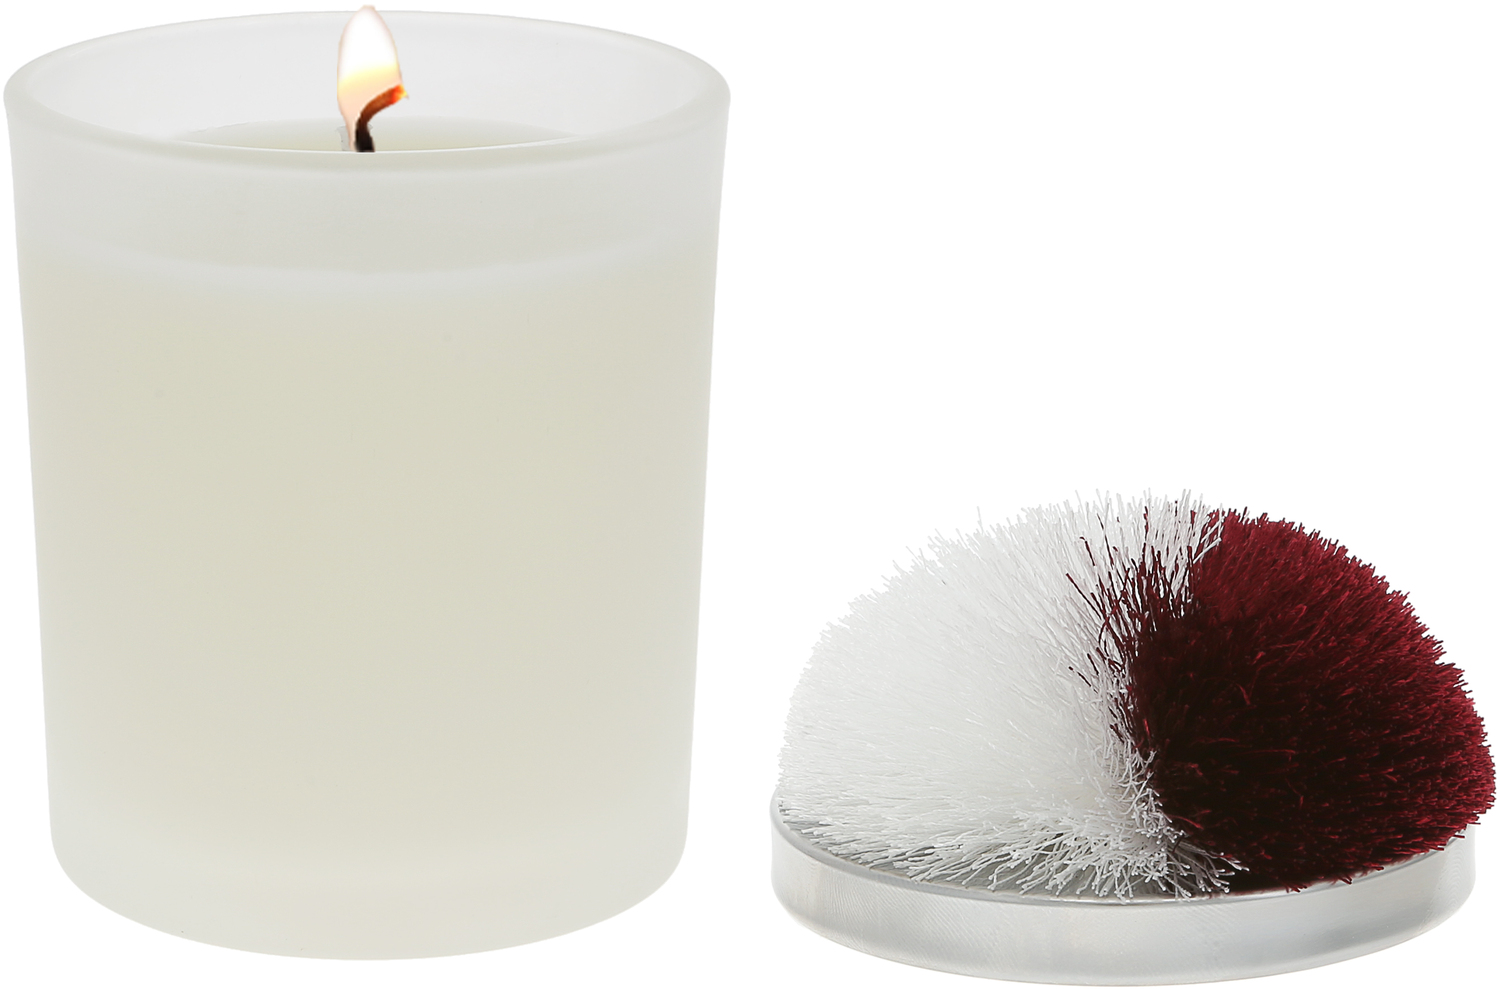 Blank - Maroon & White by Repre-Scent - Blank - Maroon & White - 5.5 oz - 100% Soy Wax Candle with Pom Pom Lid
Scent: Tranquility